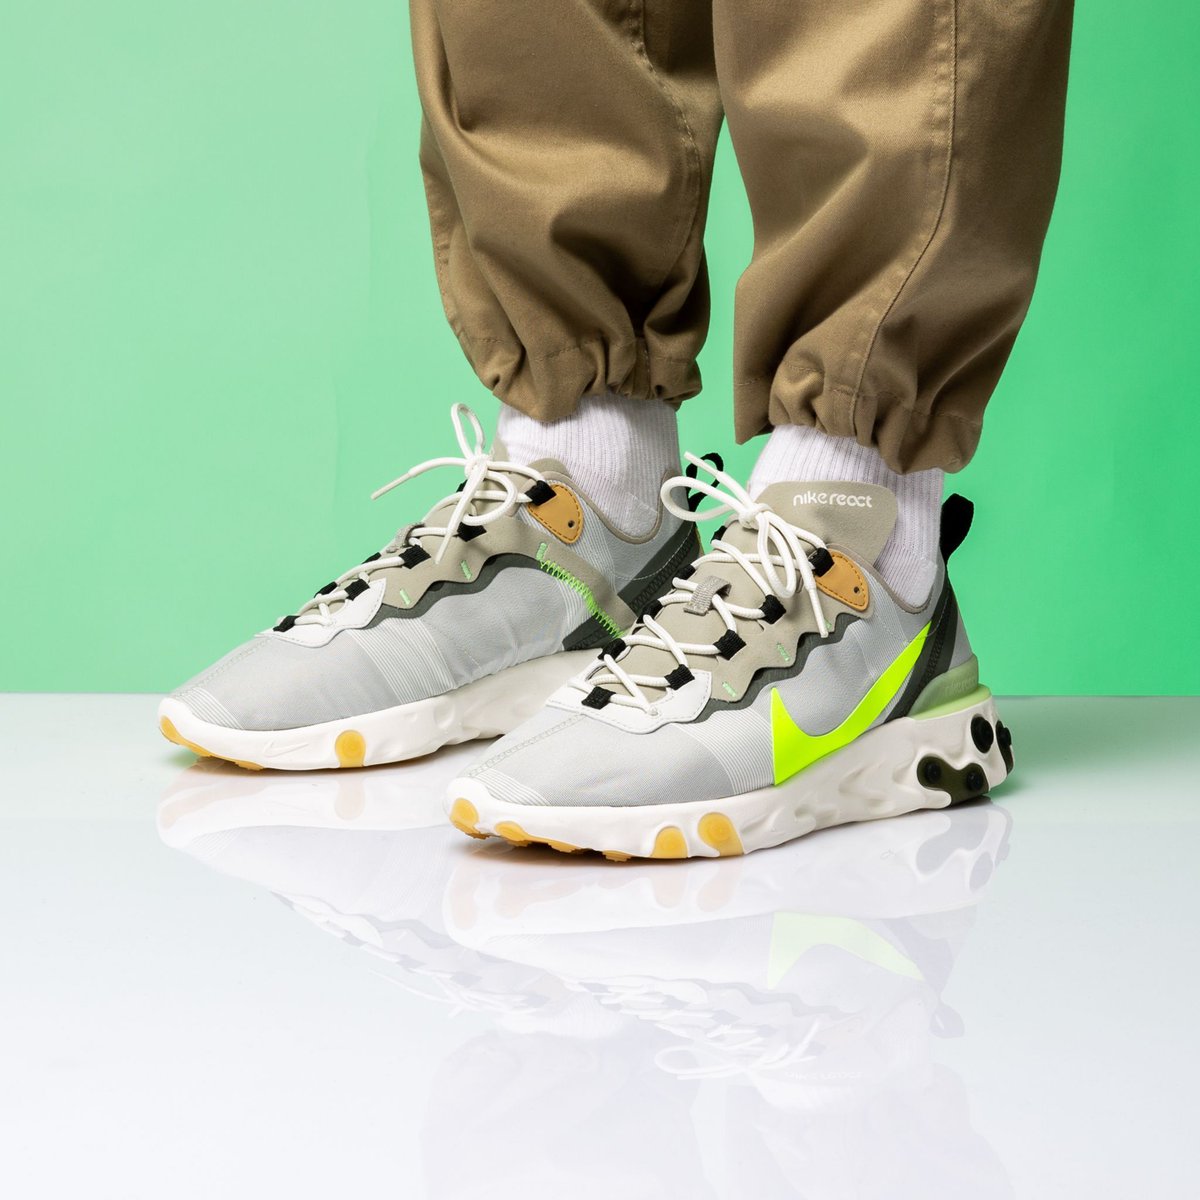 TITOLO on Twitter: "such a fresh #sneaker! 🔥 Nike React Element 55 Spruce Aura/Volt-Spruce Fog-Barely Volt take a look 💚 https://t.co/1nVKo7OSWo # nike #react #reactelement #reactelement55 #volt #fog #sneaker /